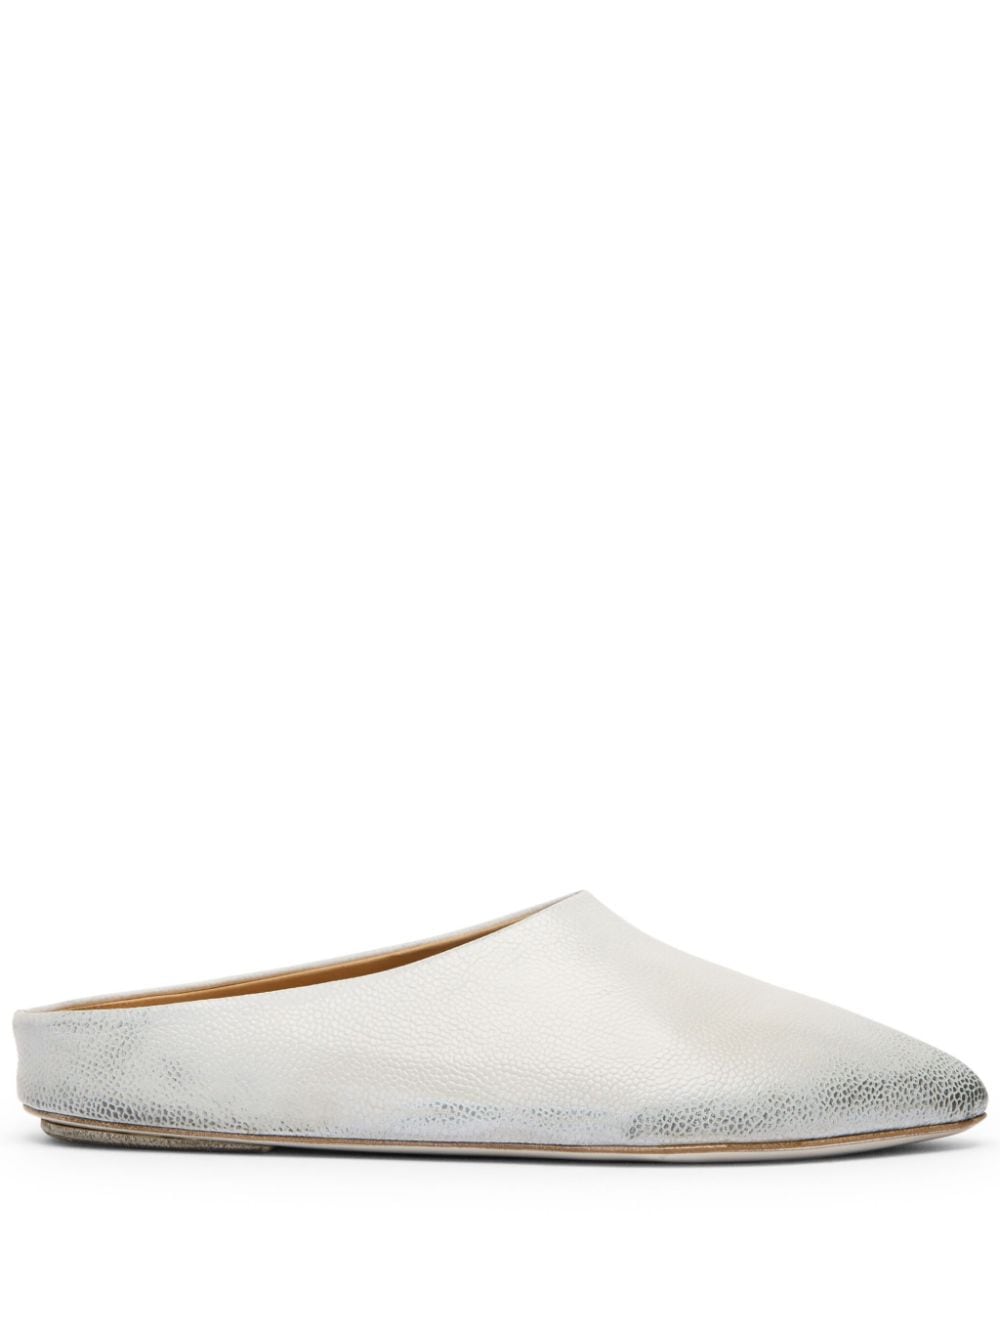 Marsèll Laminated Leather Mules In Silver